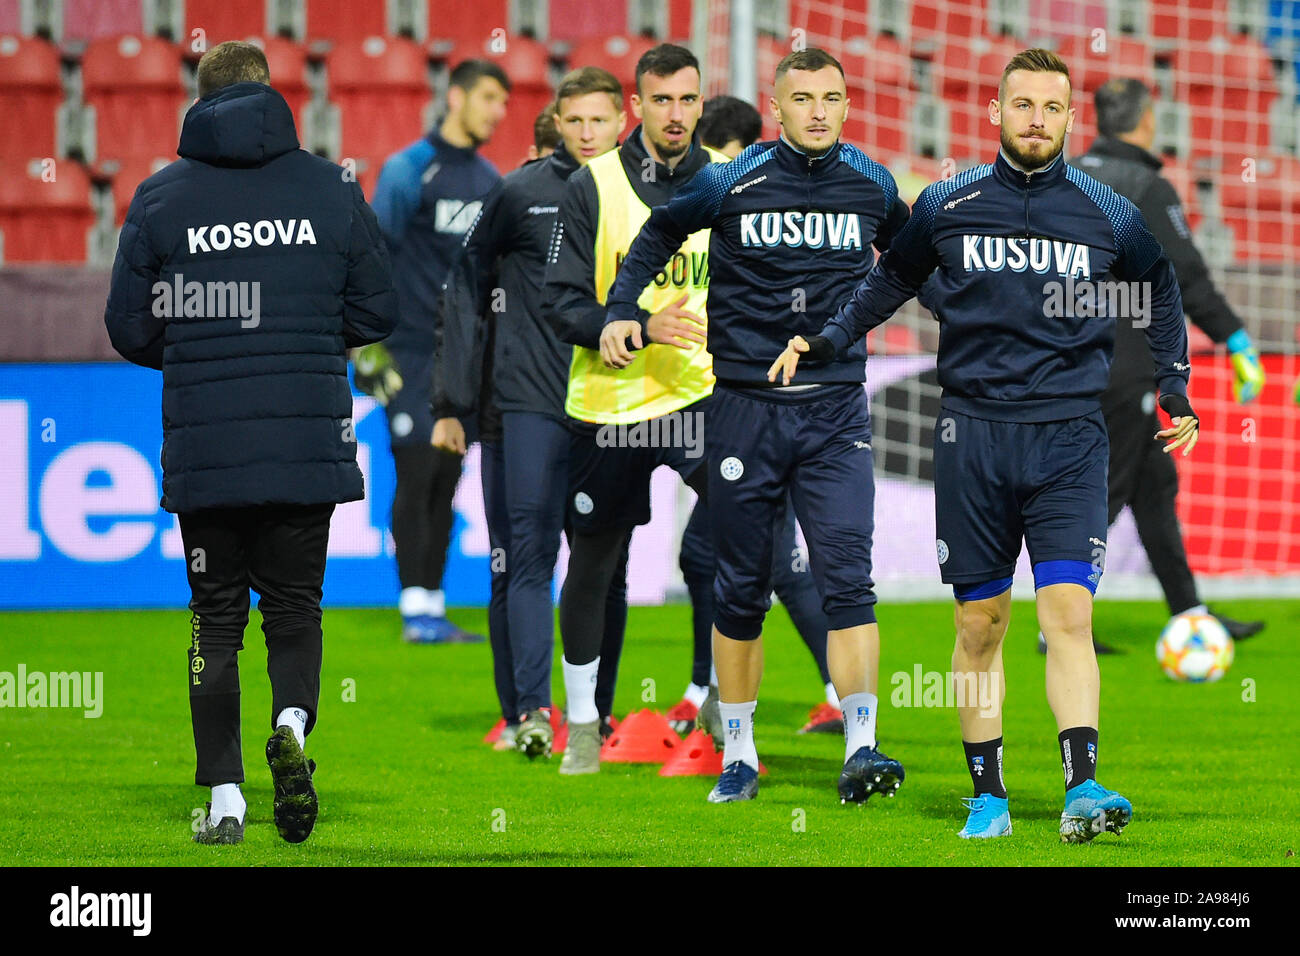 Pilsen, Czech Republic. 13th Nov, 2019. The Kosovo national football team  in action during the training session prior to the Euro qualification  matches with Kosovo in Pilsen, Czech Republic, November 13, 2019.